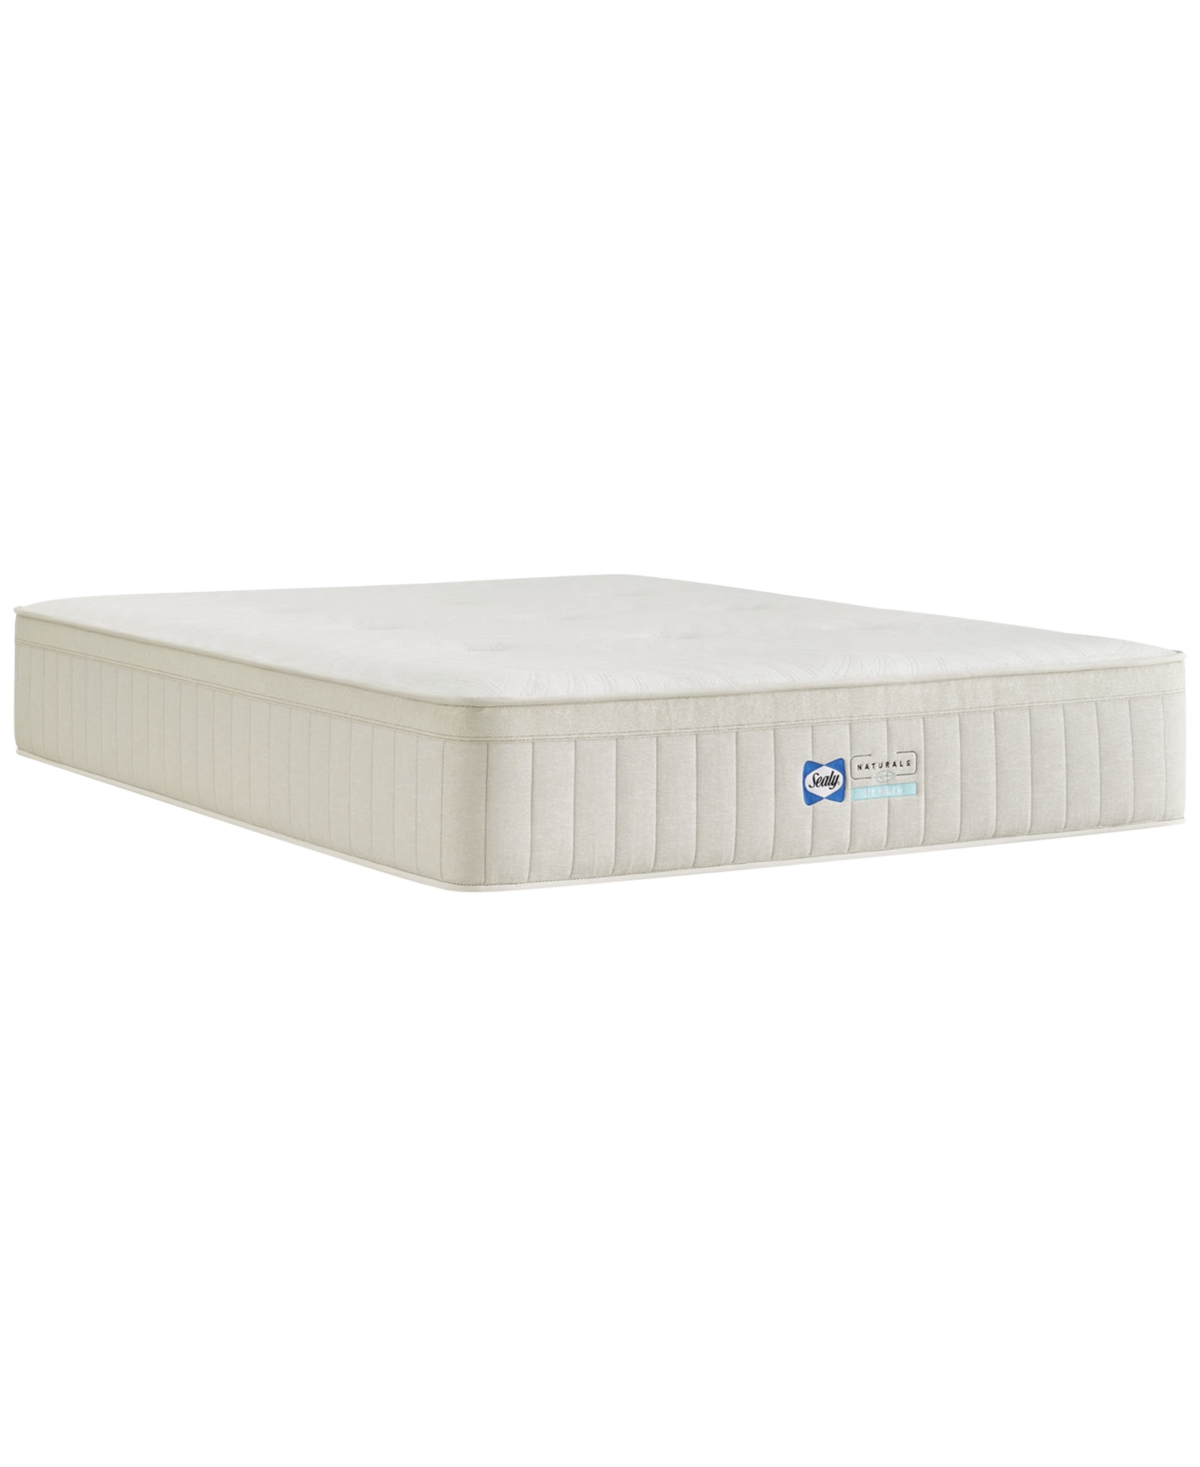 Sealy Naturals Hybrid Firm Tight Top 13" Mattress, King In White